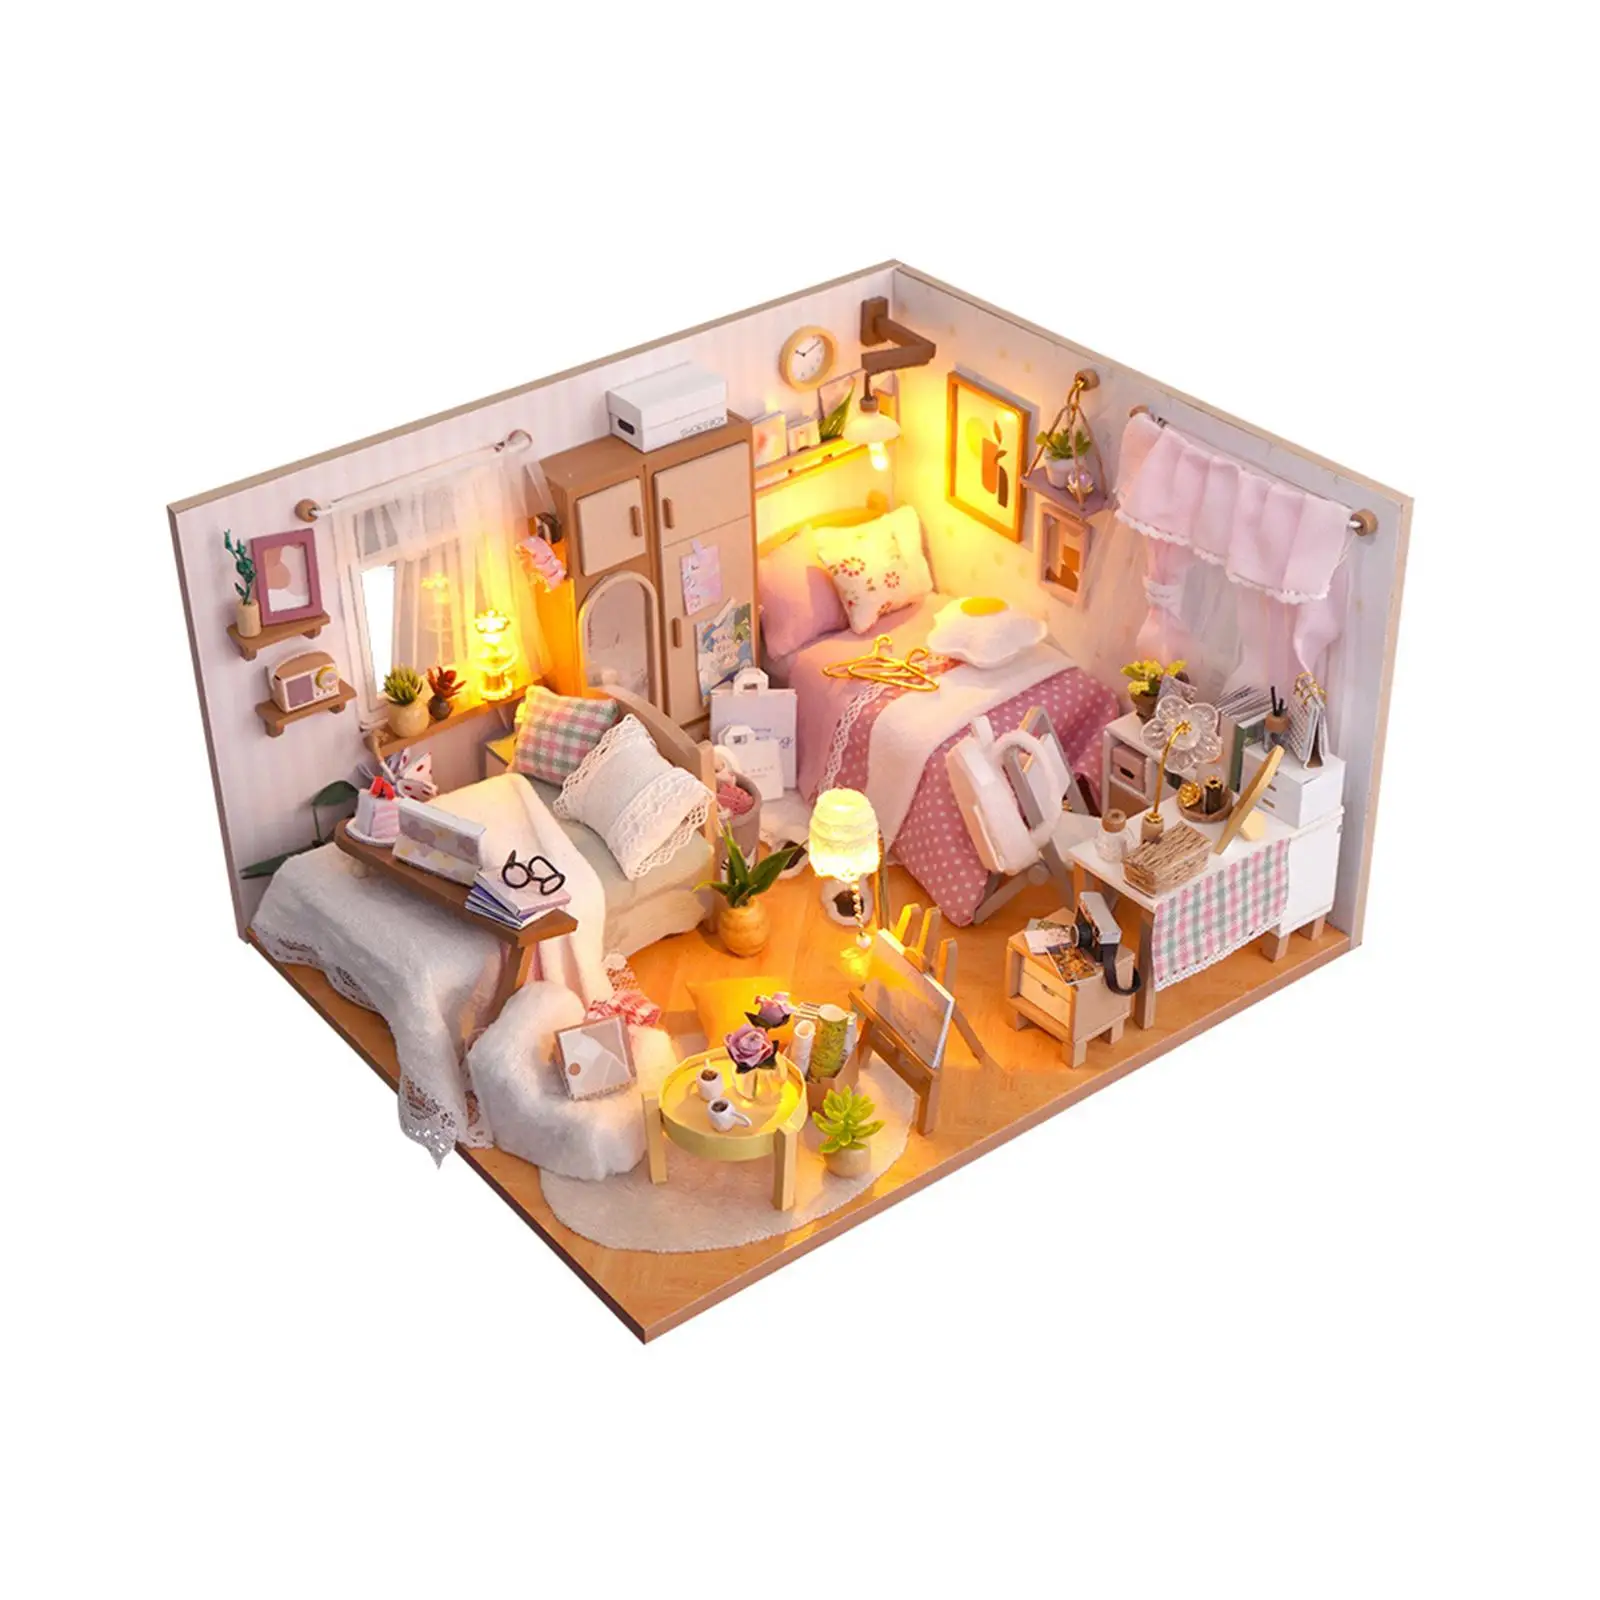 DIY Wooden Miniature Dollhouse Kits Easy to Assemble for Kids Adults Collectibles with Lights Educational Toy Modern Room Box